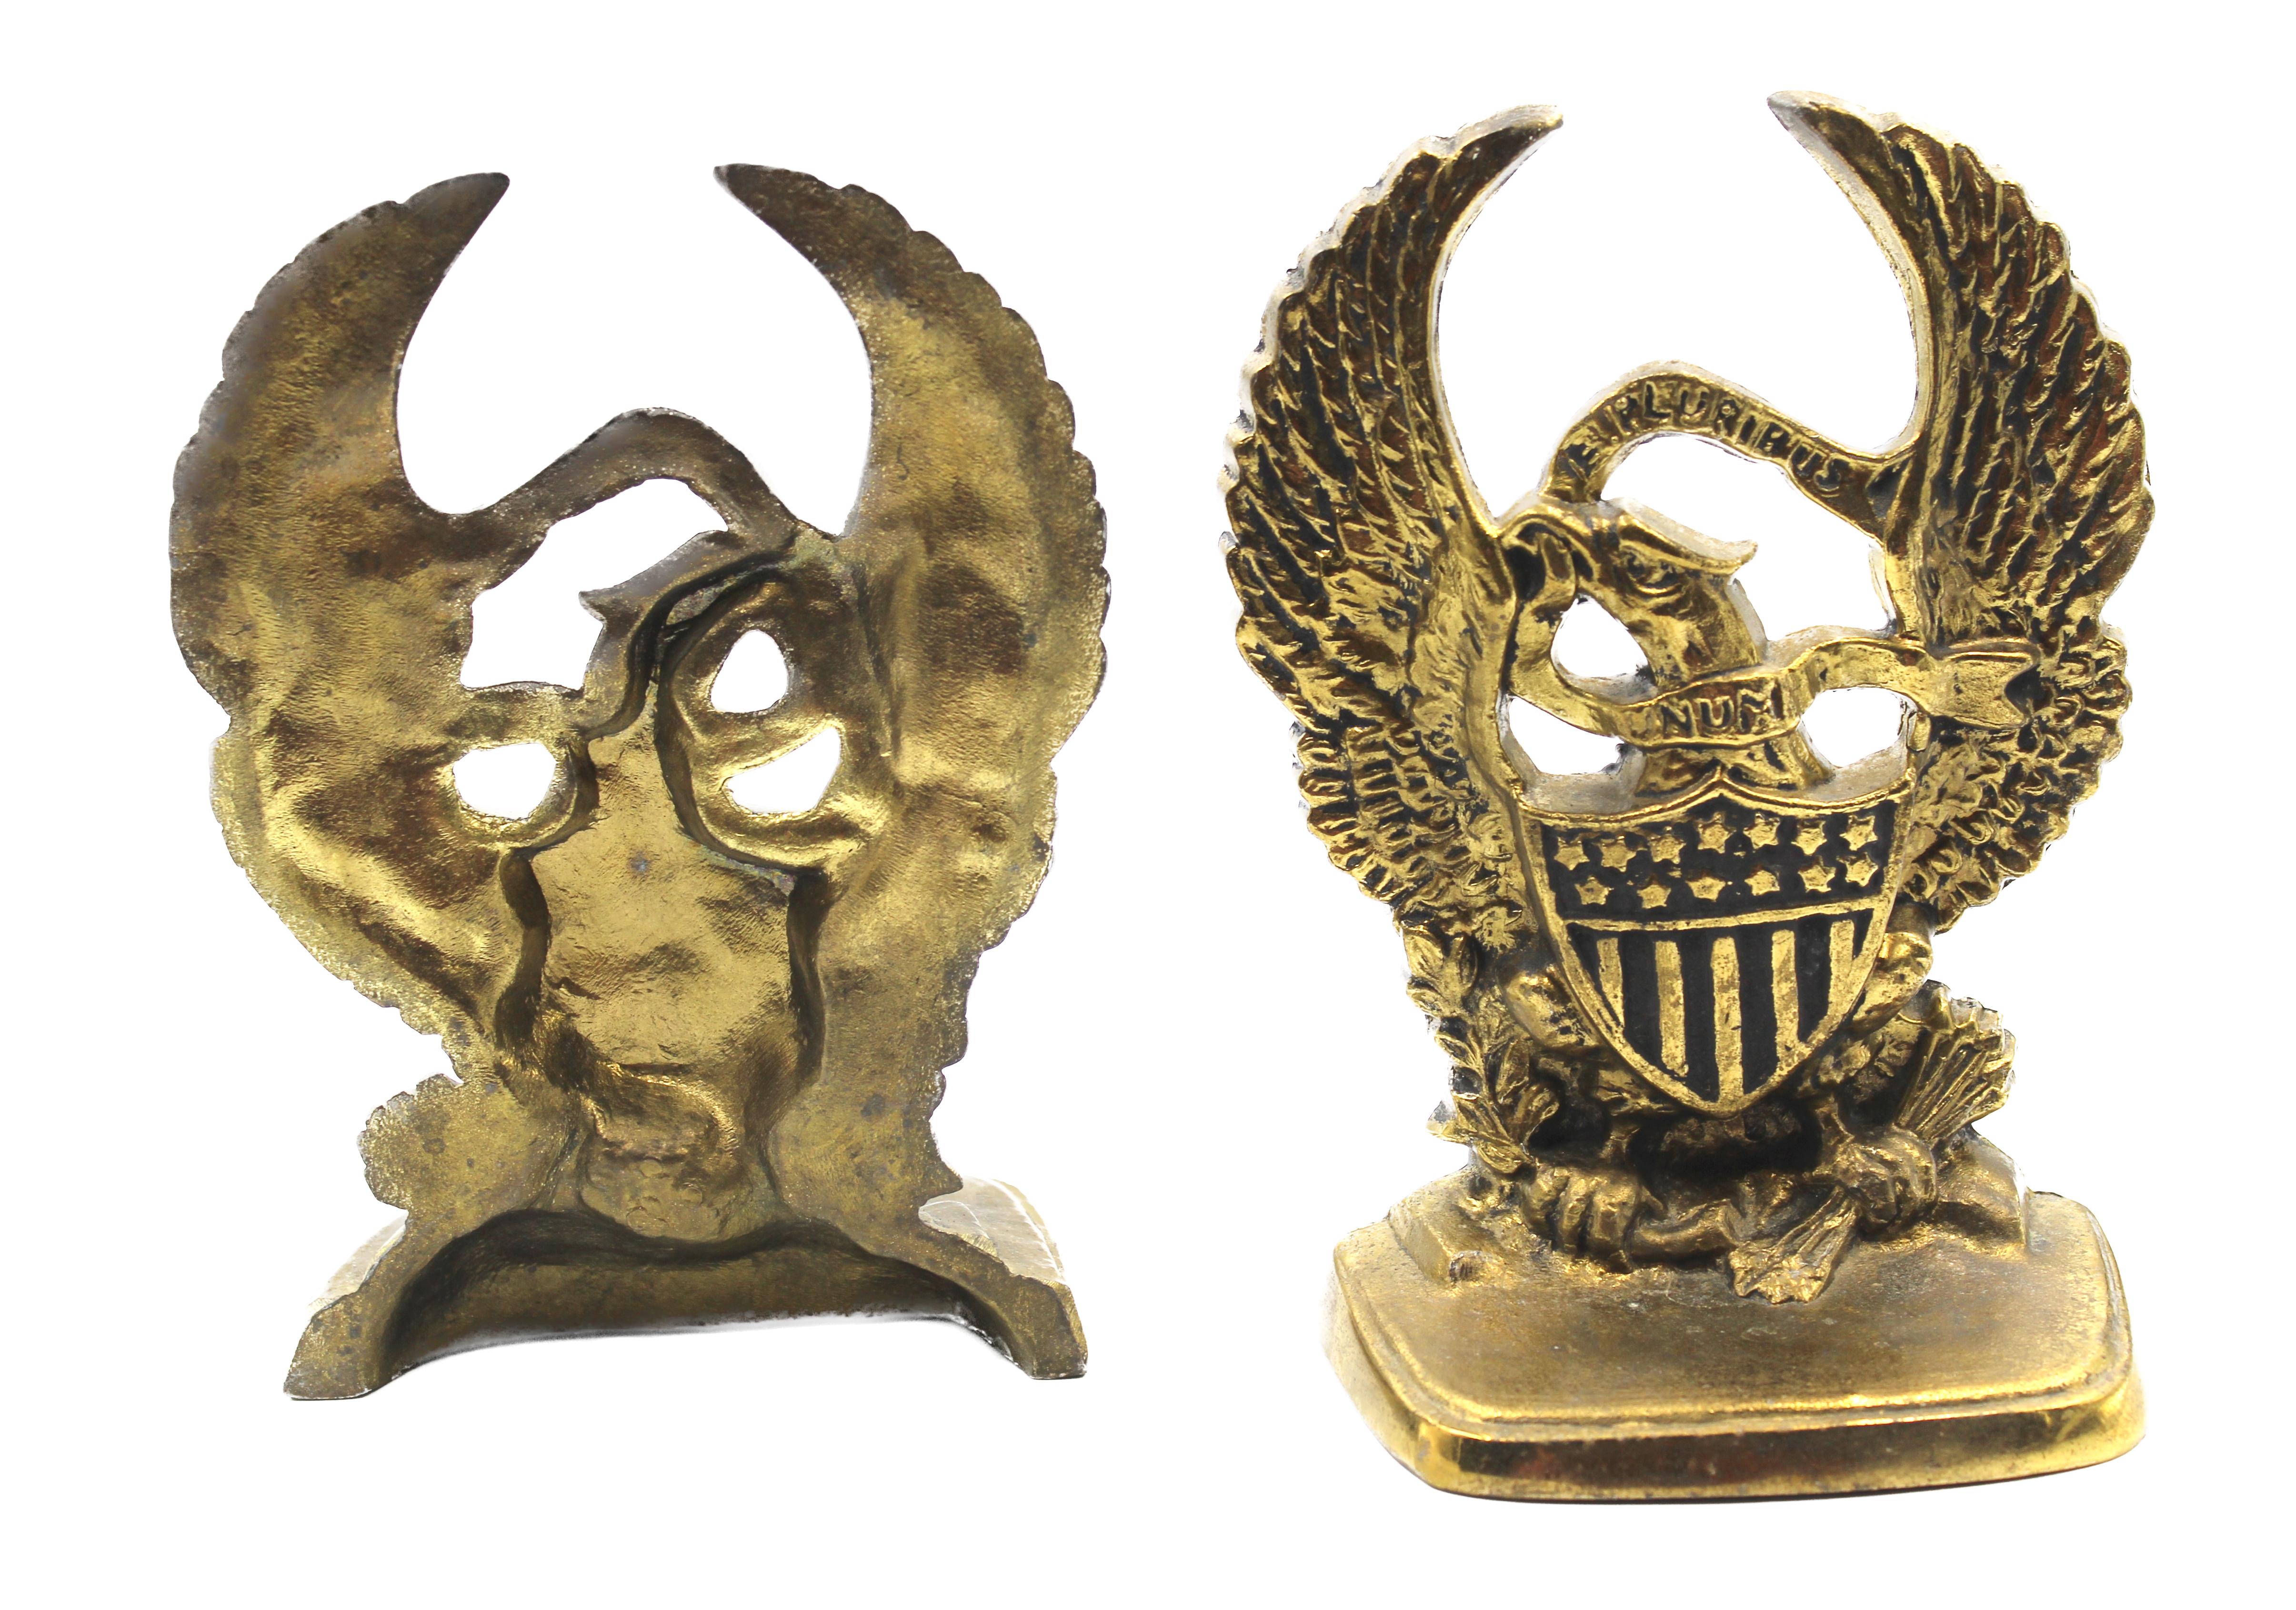 Offered is a vintage set of brass bookends featuring an eagle with widely spread wings. The eagle holds arrows in its talons and appears with a large shield against its chest. The eagle carries a banner in its mouth that reads 